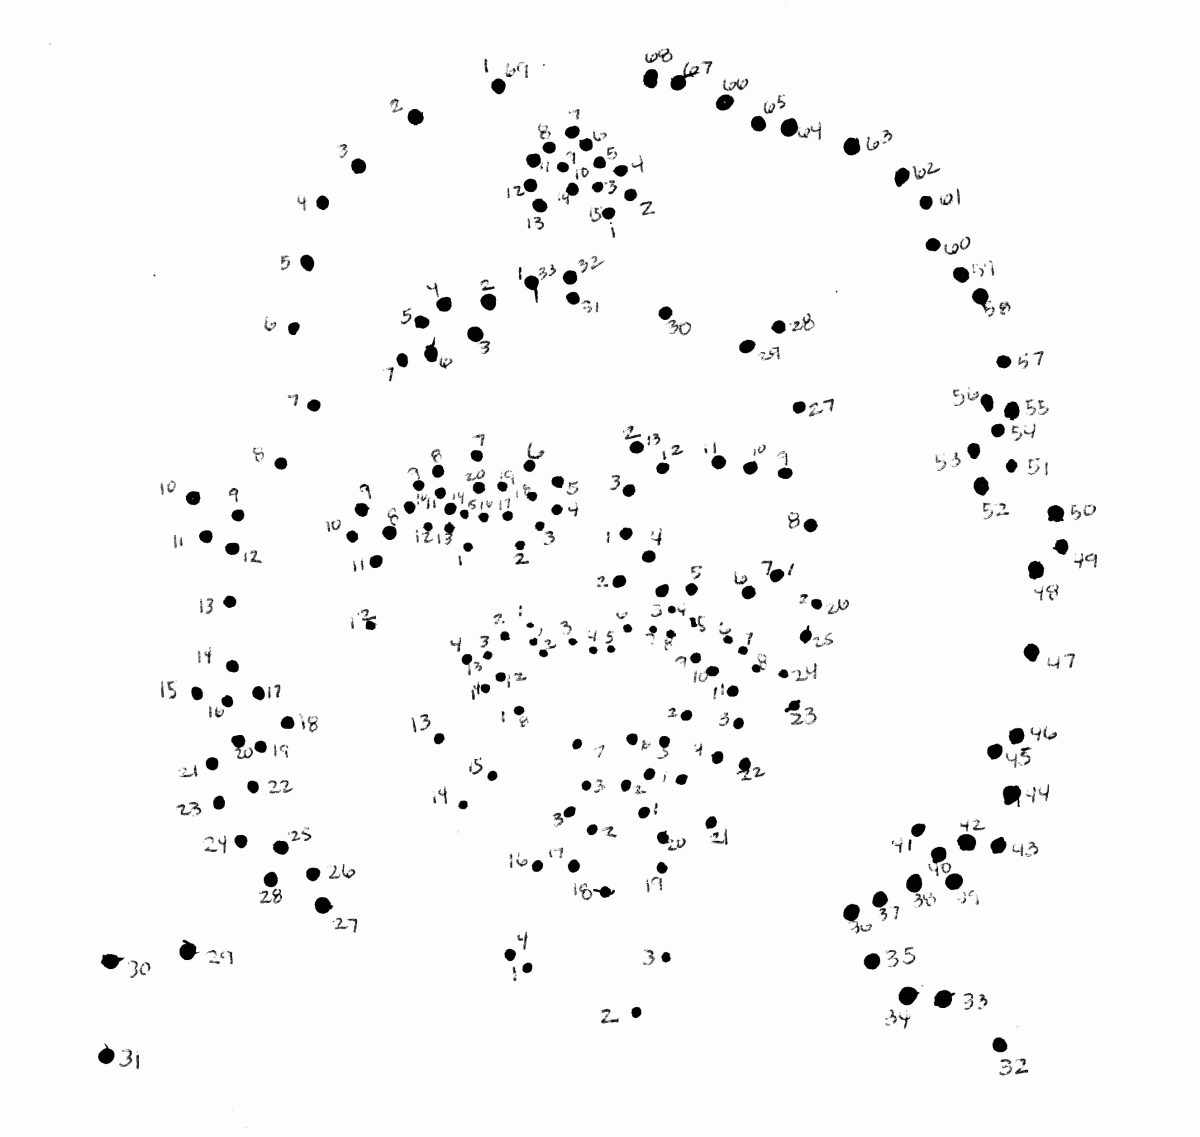 hard-connect-the-dots-printable-that-are-gorgeous-tristan-website